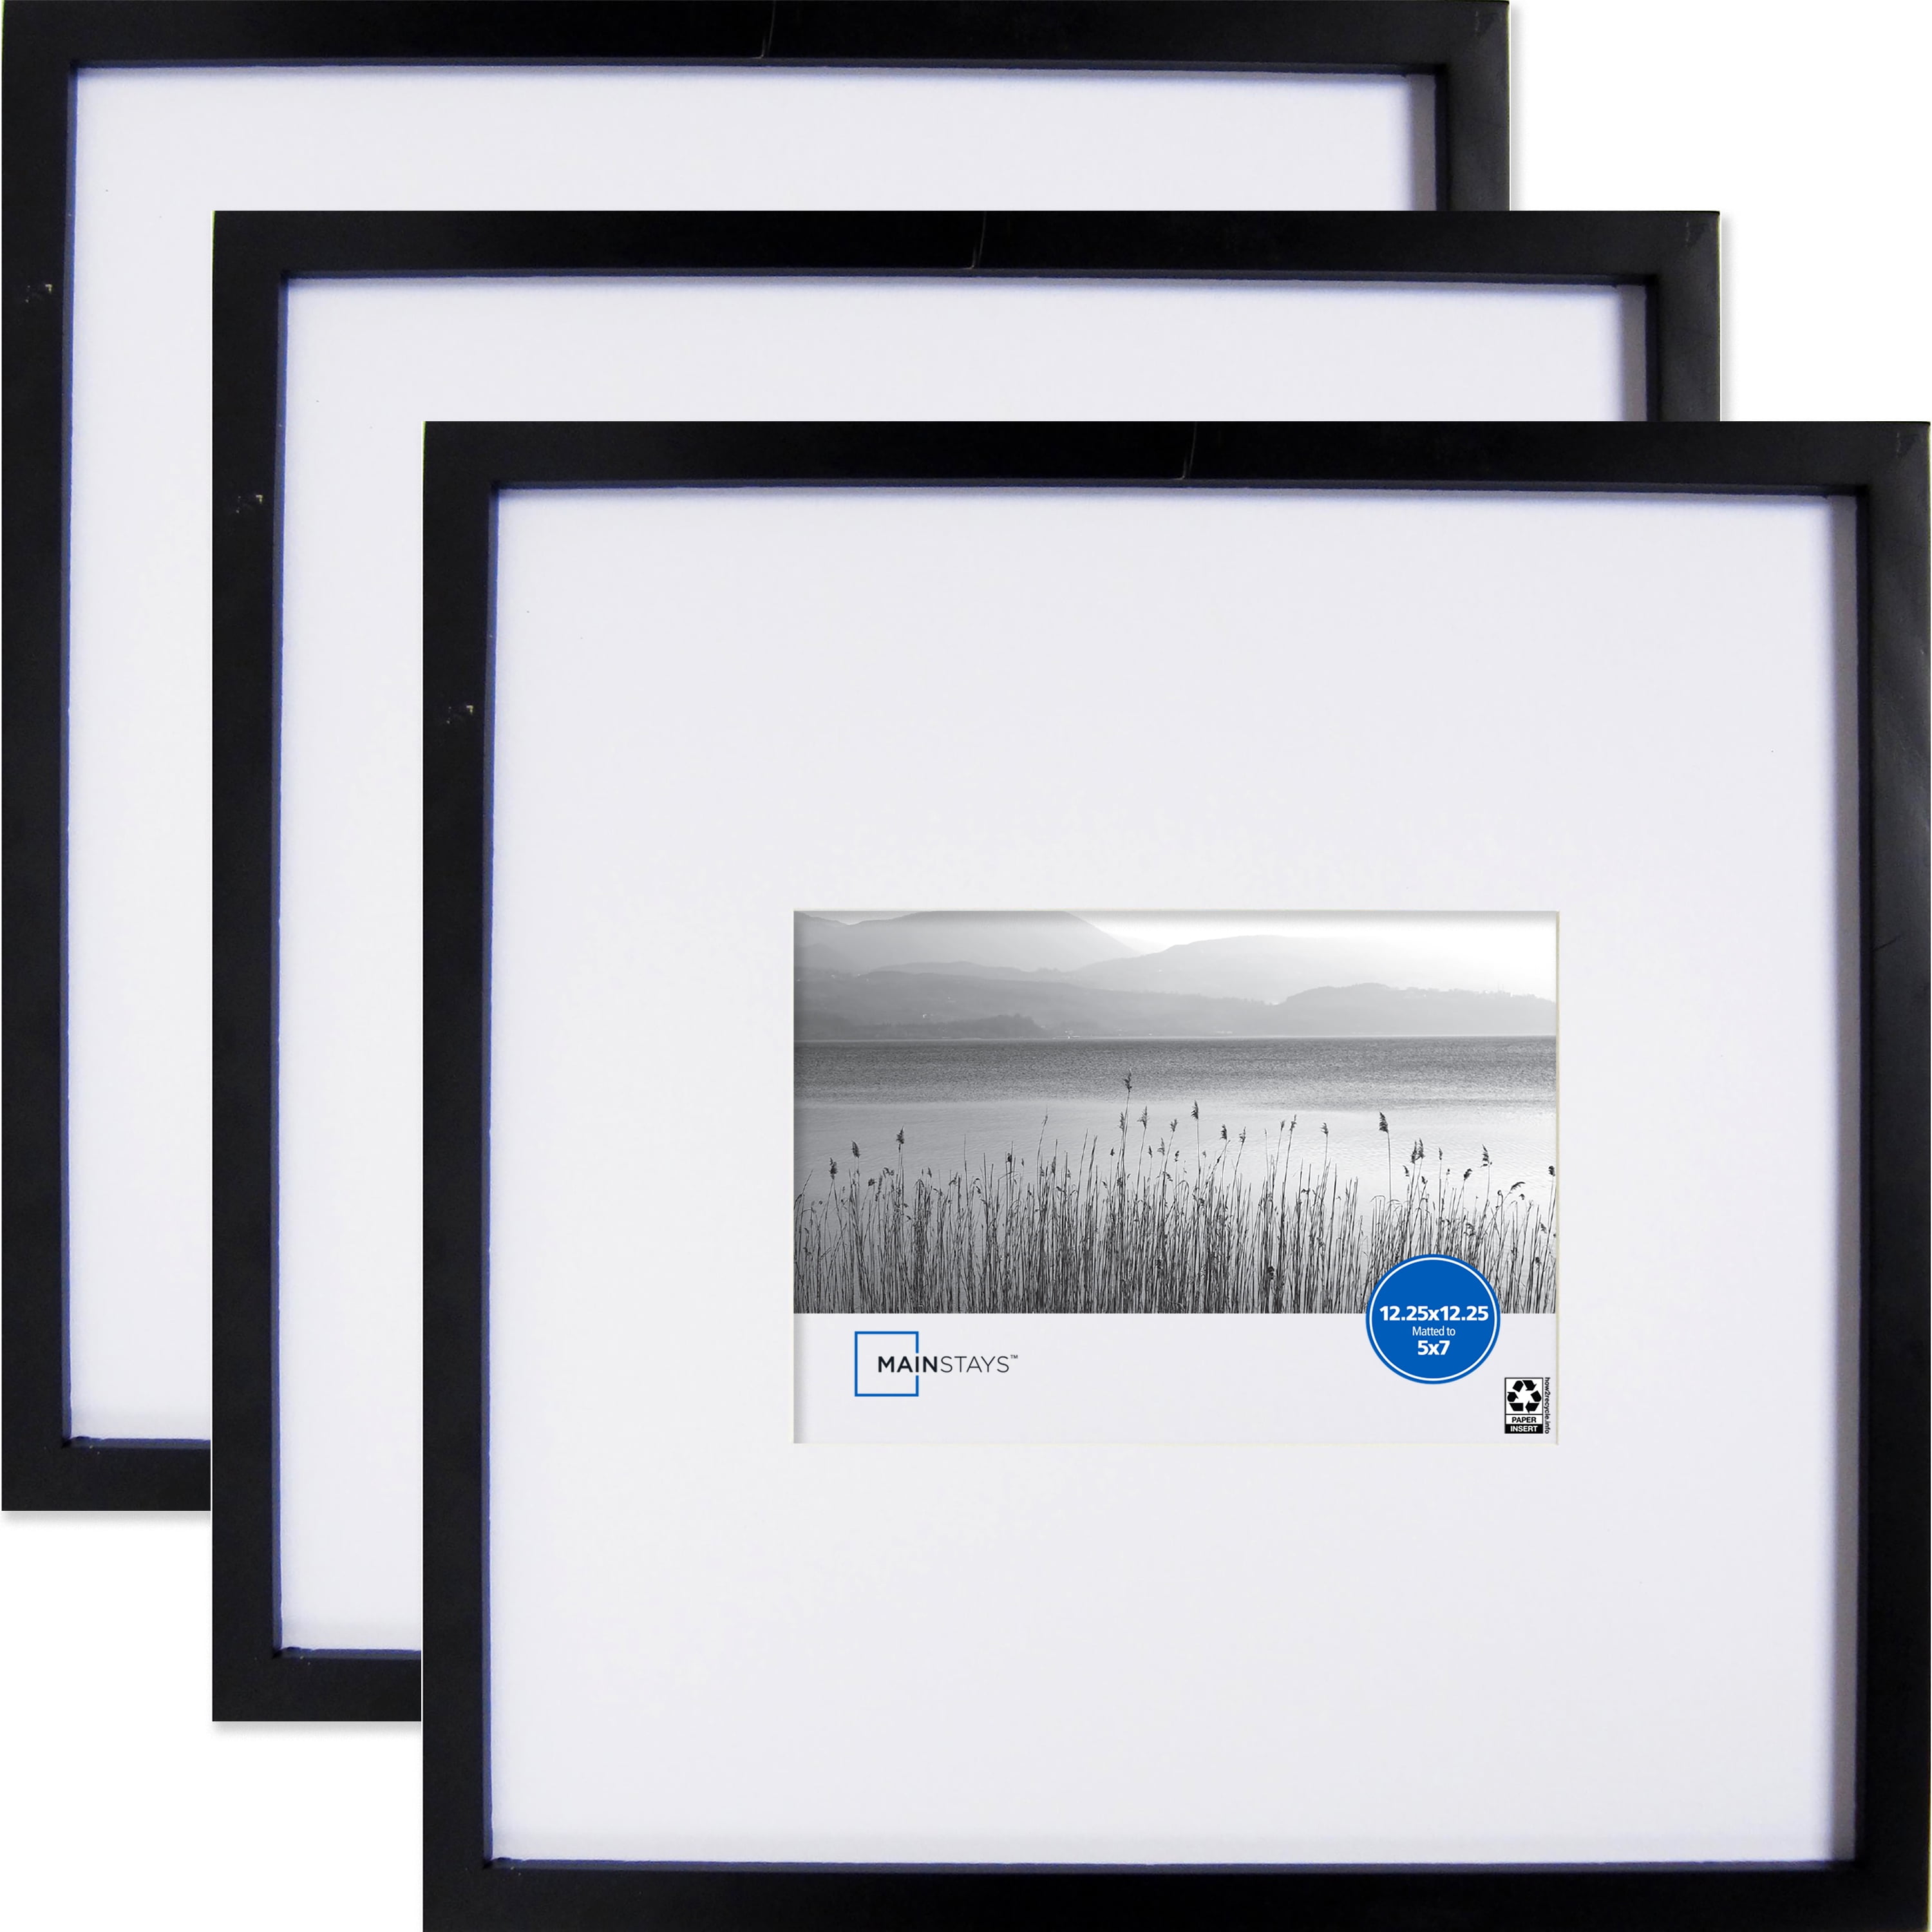 Mainstays 12.25x12.25 Matted to 5x7 Linear Black Picture Frame, Set of 3 -  Walmart.com